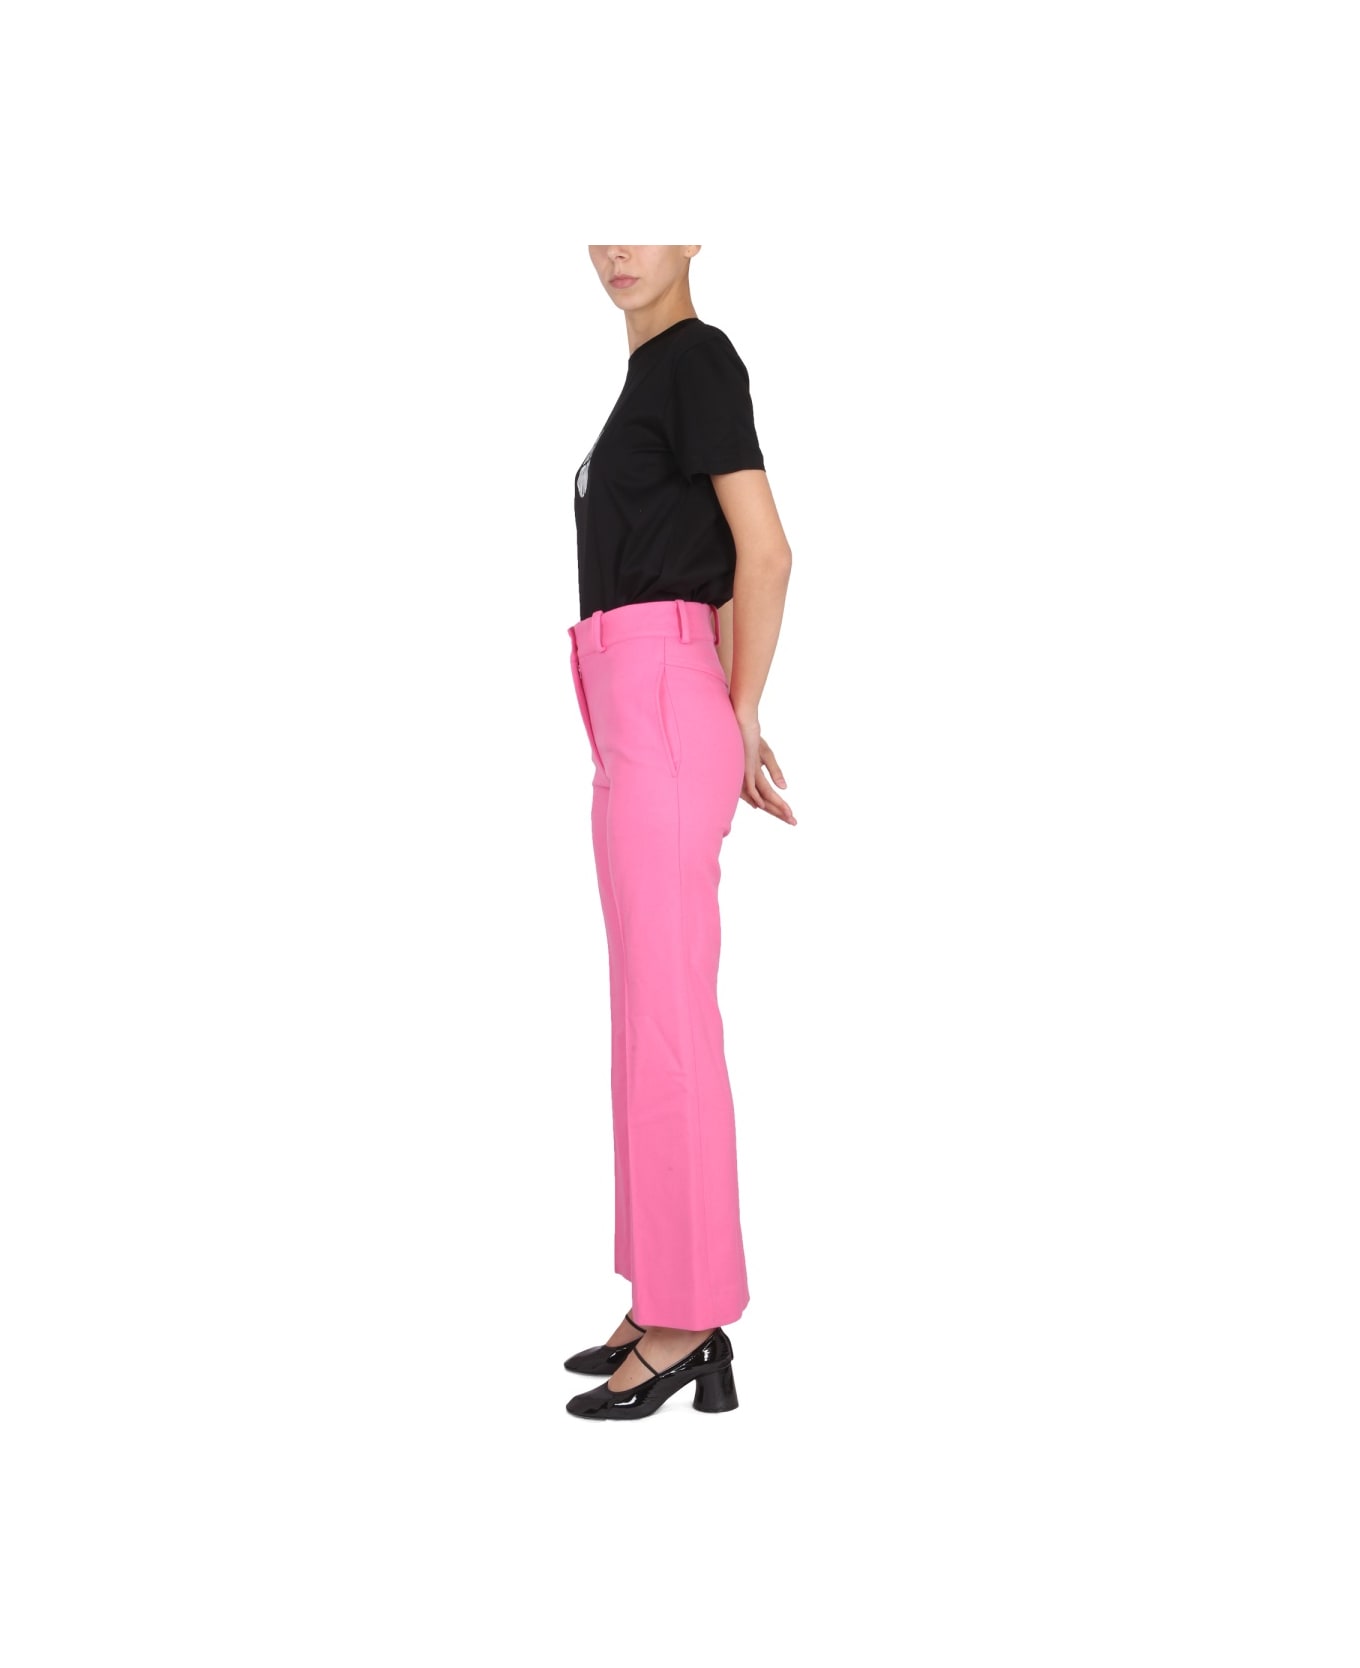 Patou Bell Bottoms - PINK ボトムス